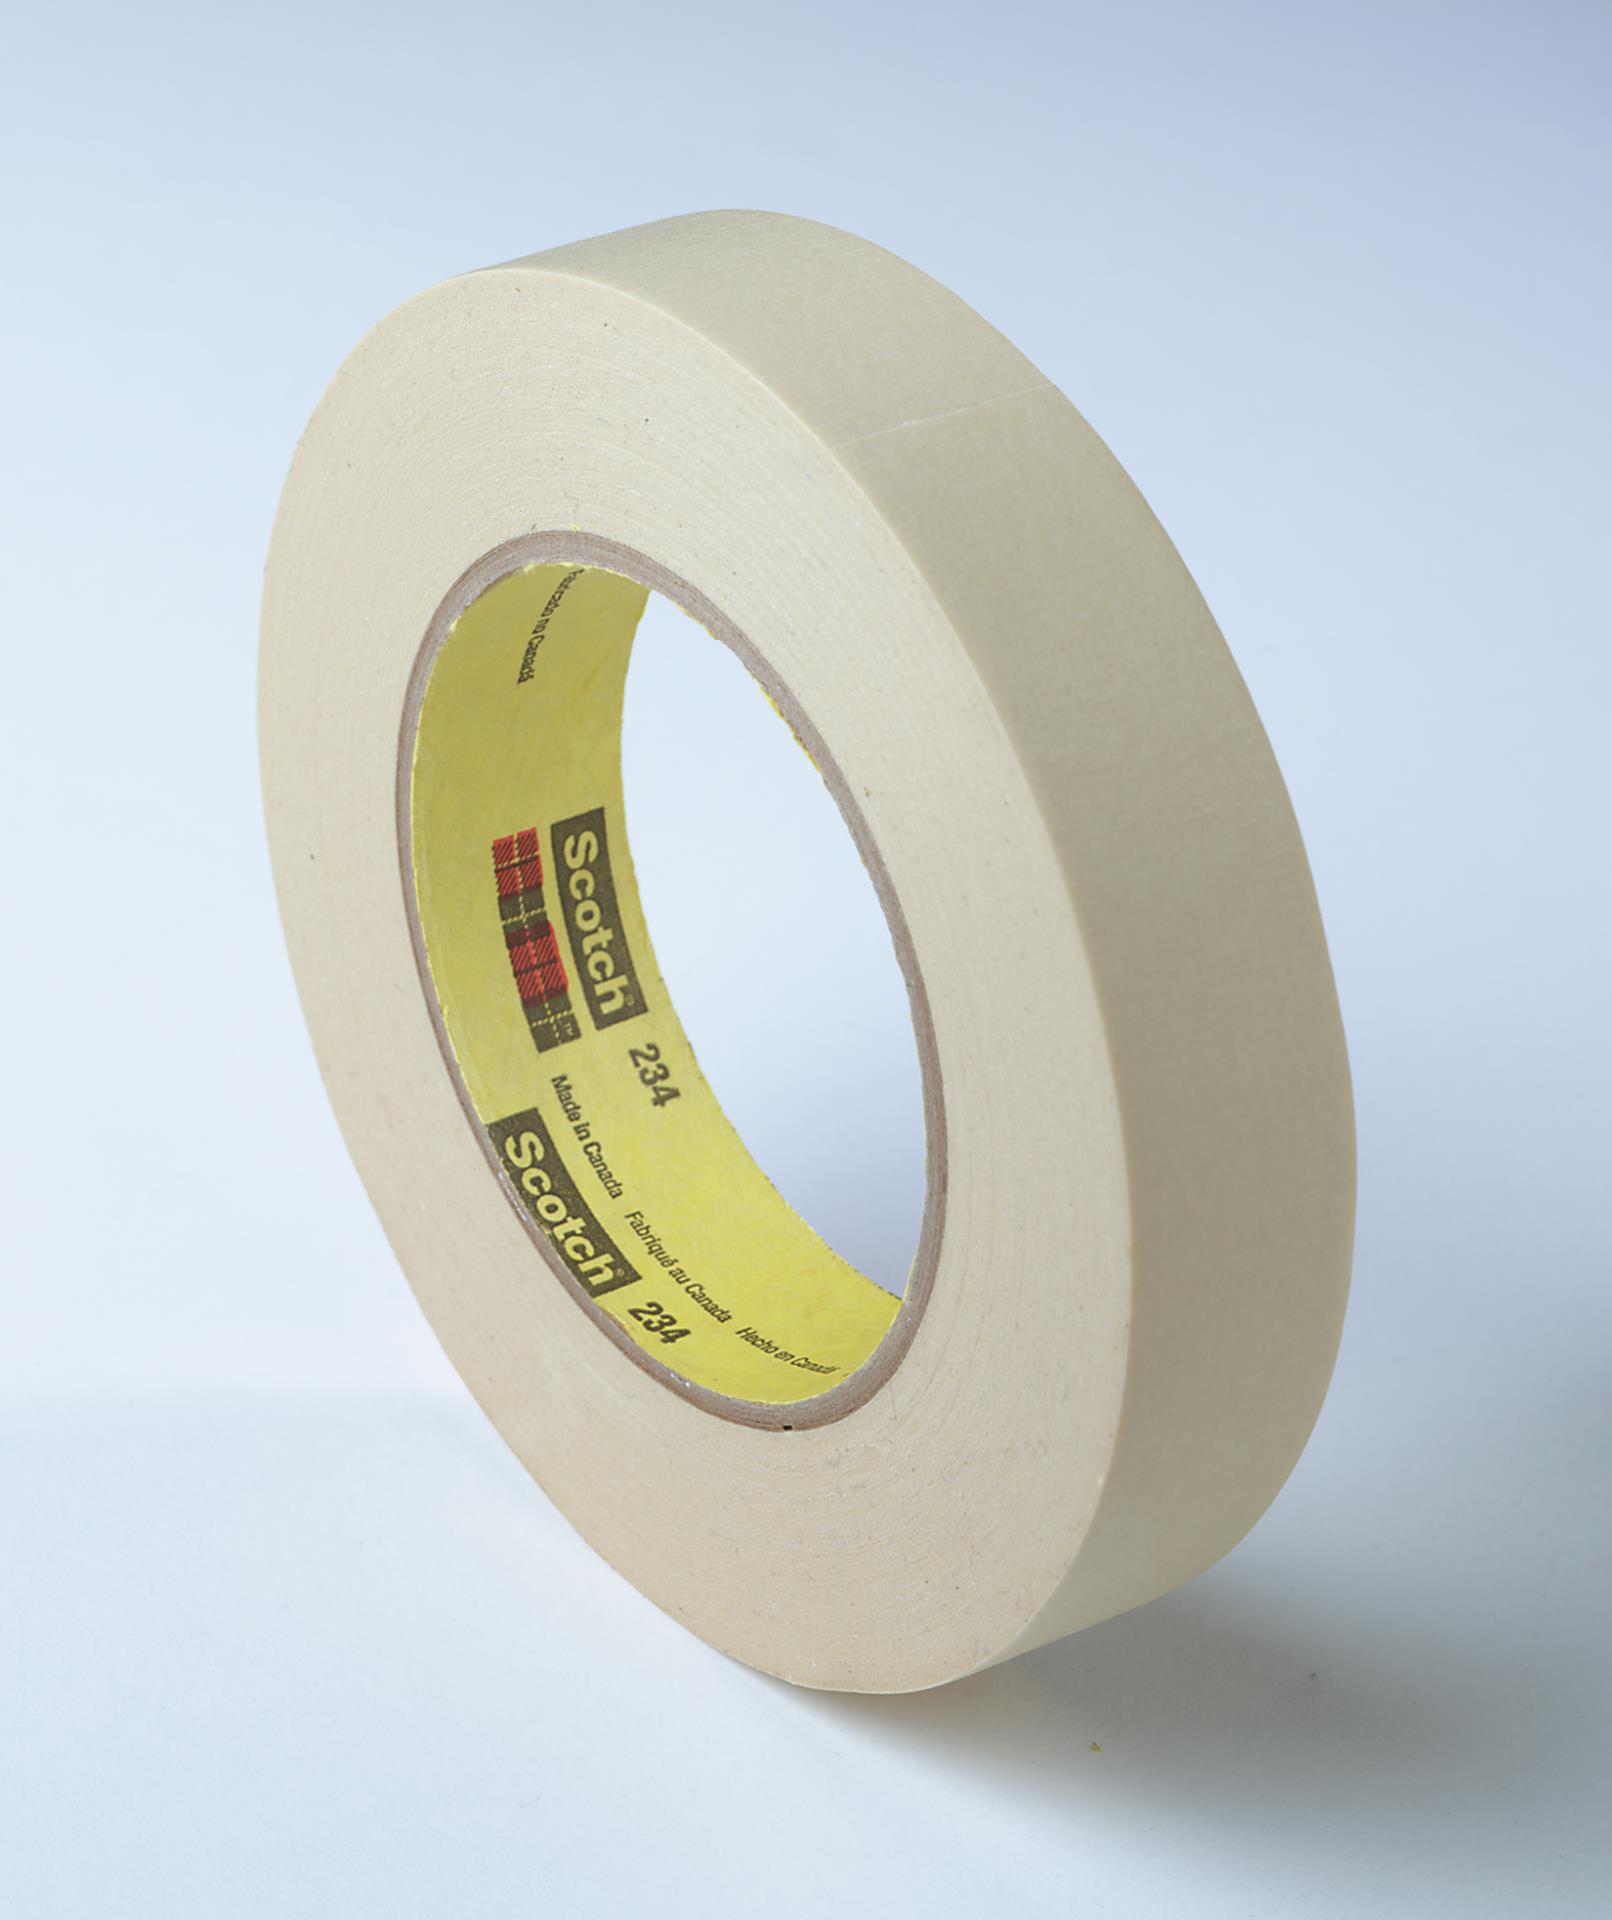 Glass Fiber Tape Packing high Sticky Tape Aviation Mould Electric Appliance Sealing Tape Star Strapping Tape 2 Inch X 55 Yard 